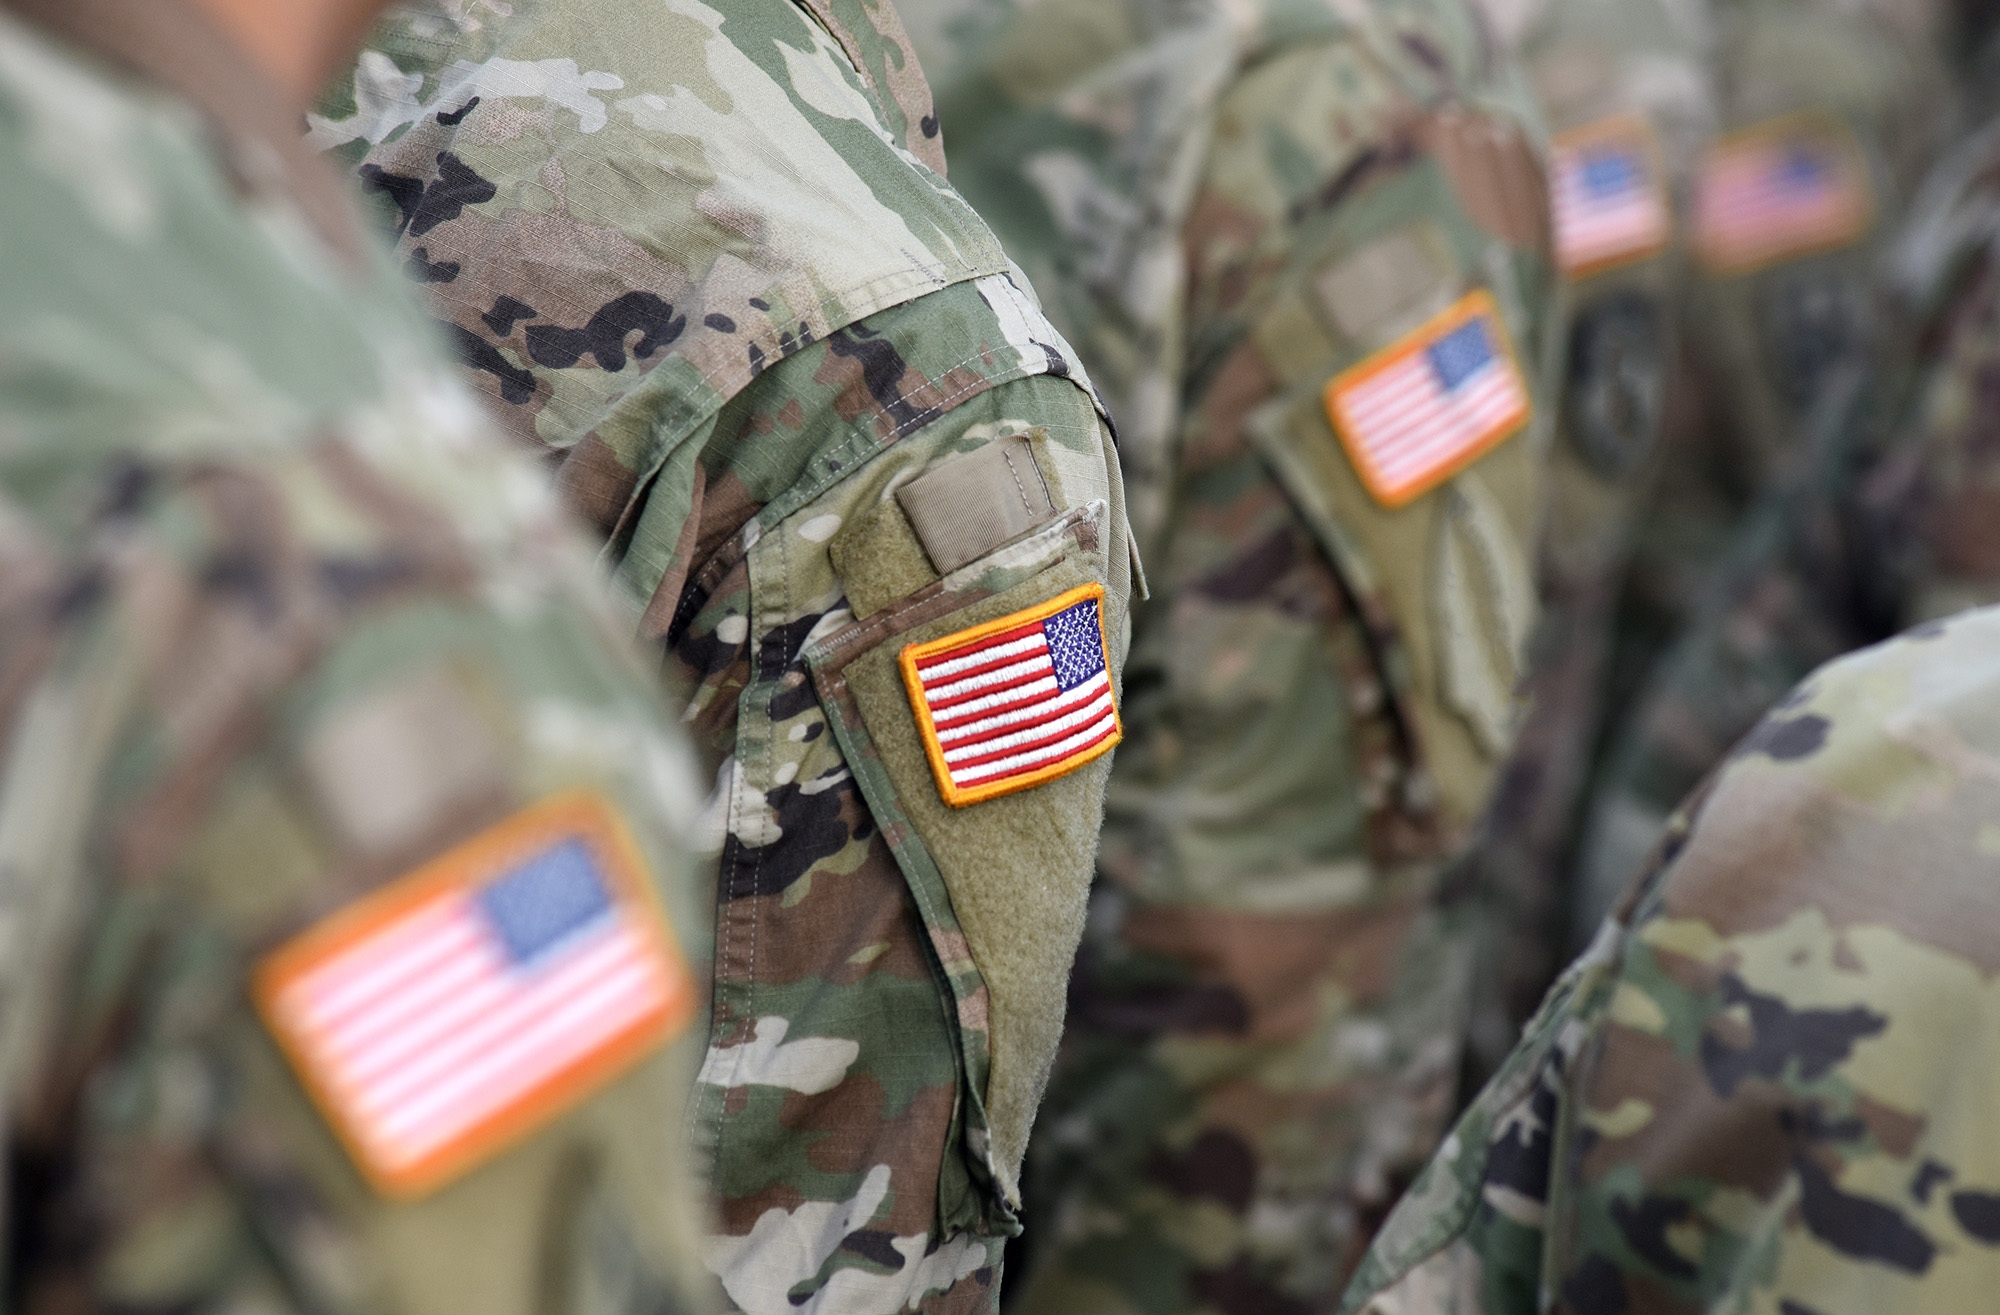 U.S. soldiers stand in close quarters, their shoulders baring a U.S. flag patch. Their faces are obscured.